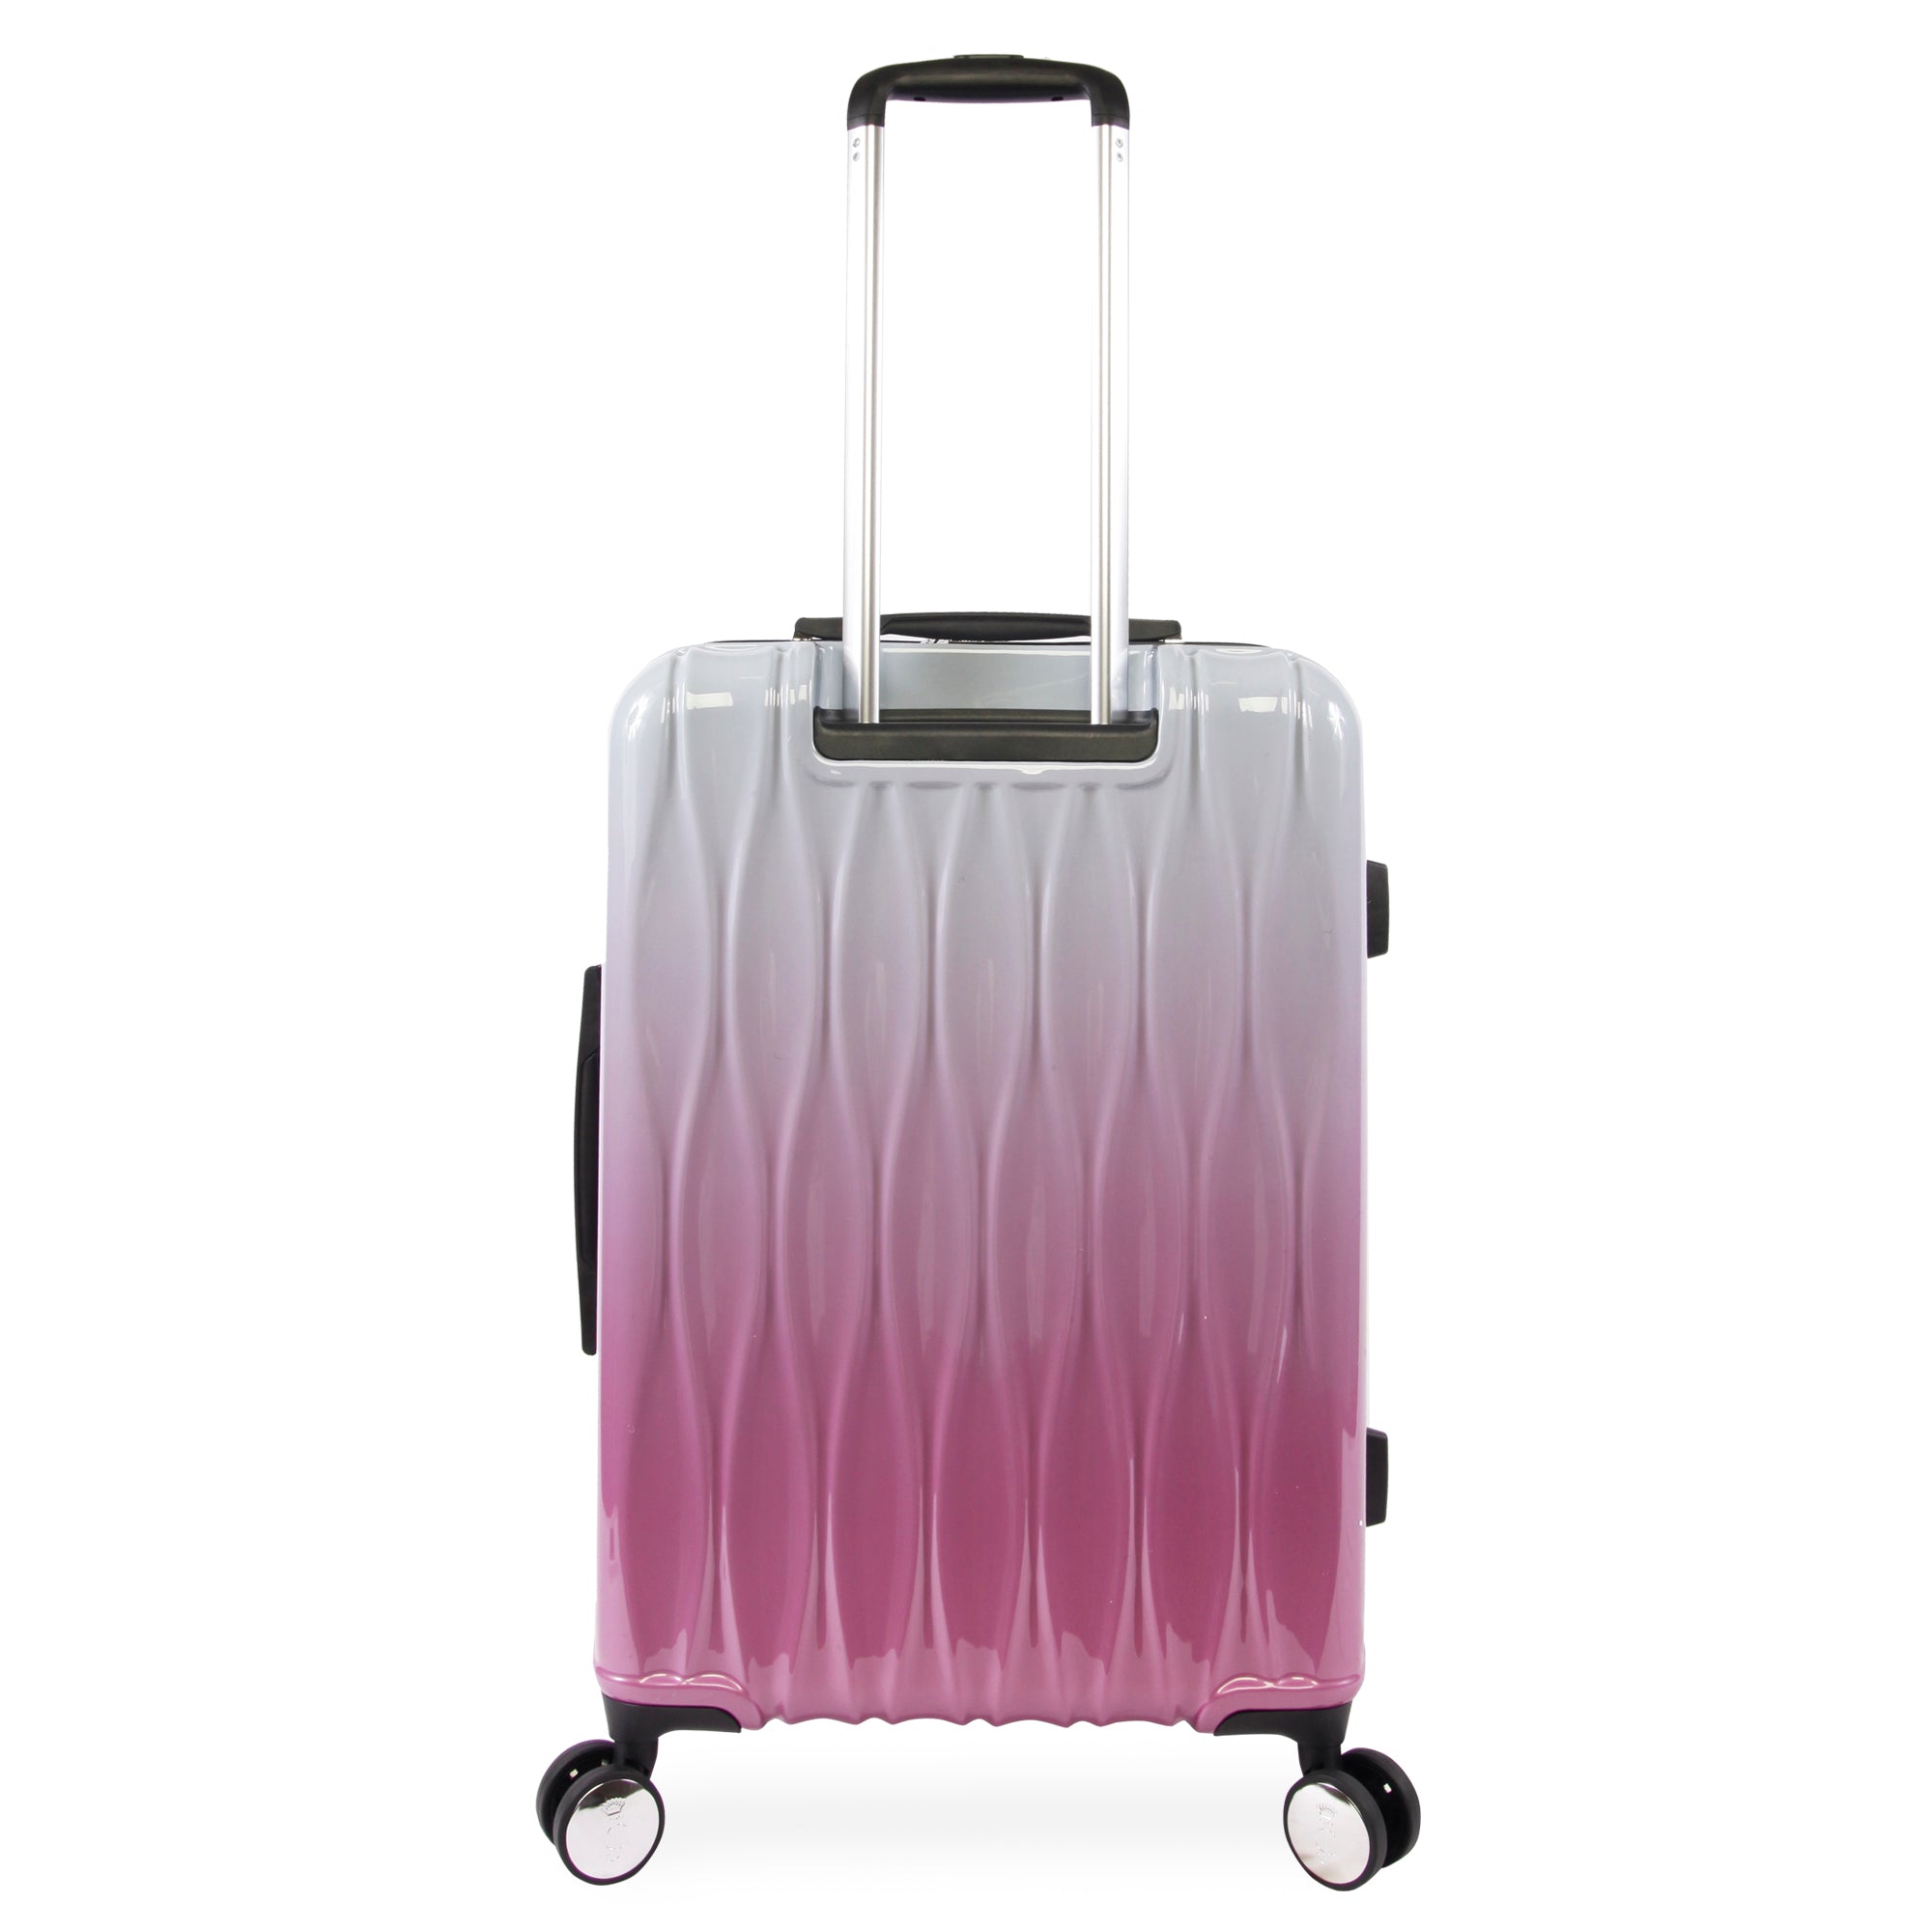 3-Piece Hardside Spinner Luggage Set - Juicy Couture